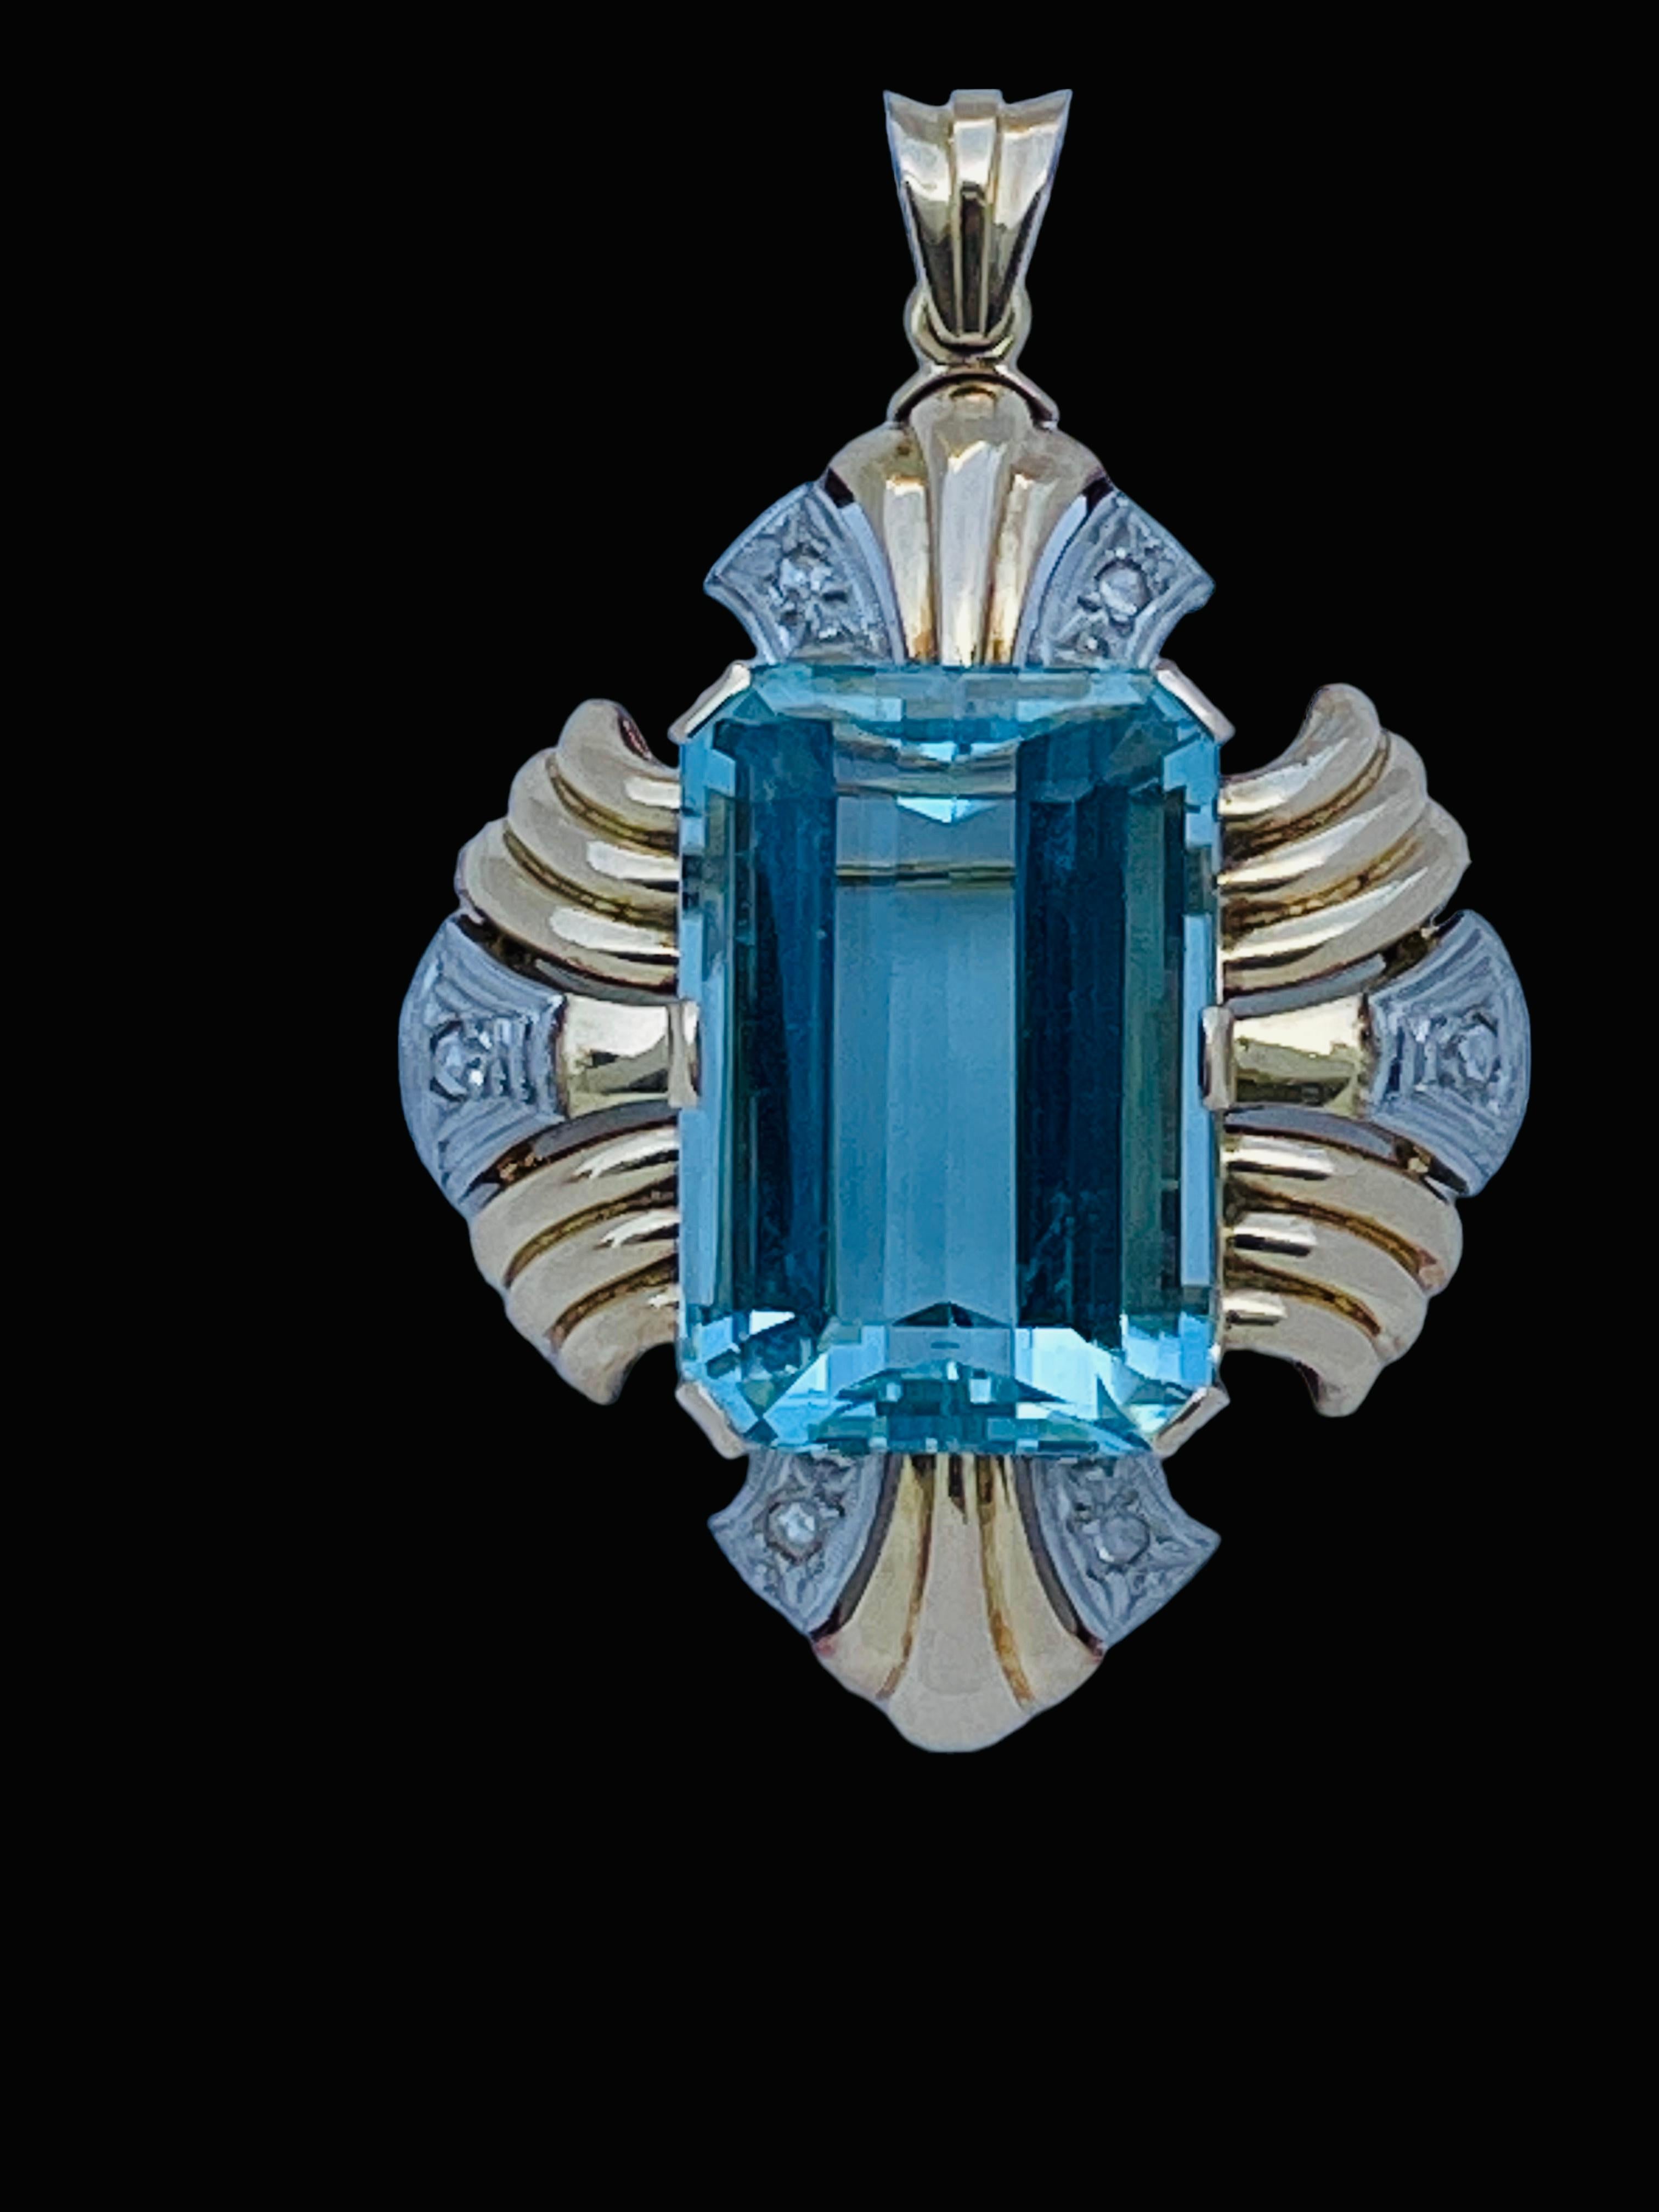 This is an 18K yellow and white gold aquamarine and diamonds pendant/brooch. It depicts an emerald cut aquamarine of 22.18ct in prong setting in the center. It is adorned with yellow gold Fleur de Lis edge like in addition to two set of triplets